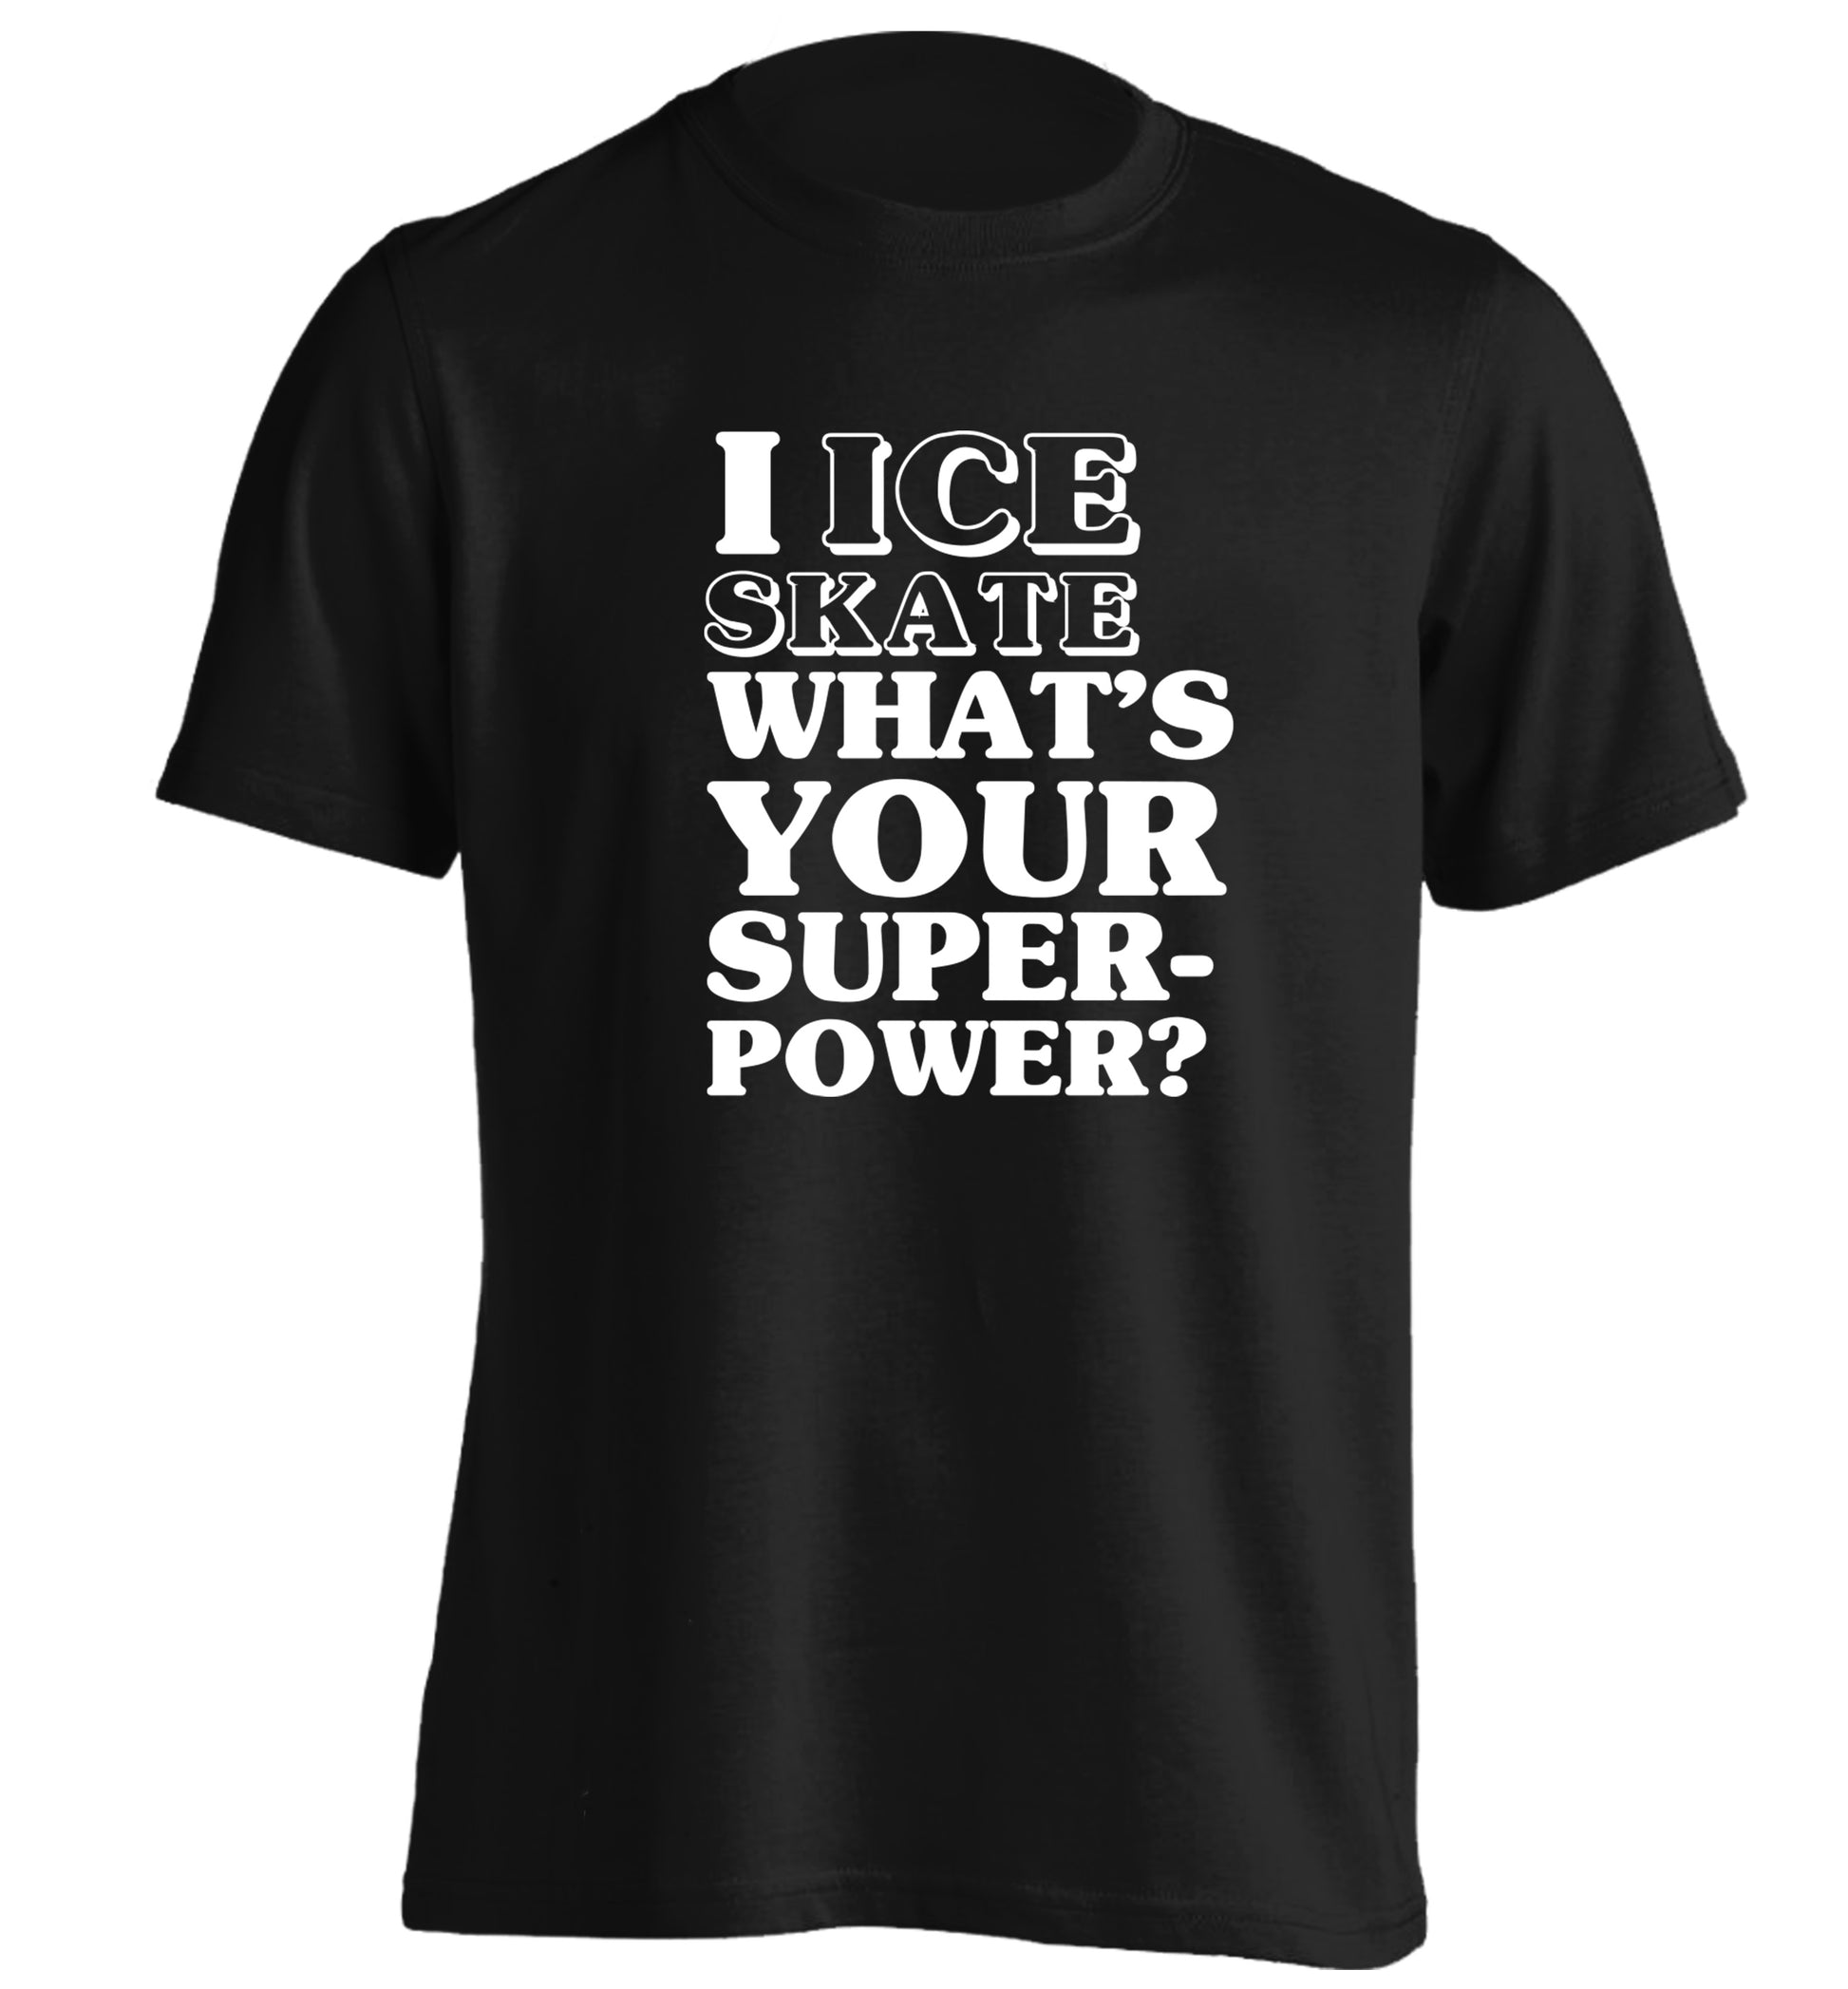 I ice skate what's your superpower? adults unisexblack Tshirt 2XL